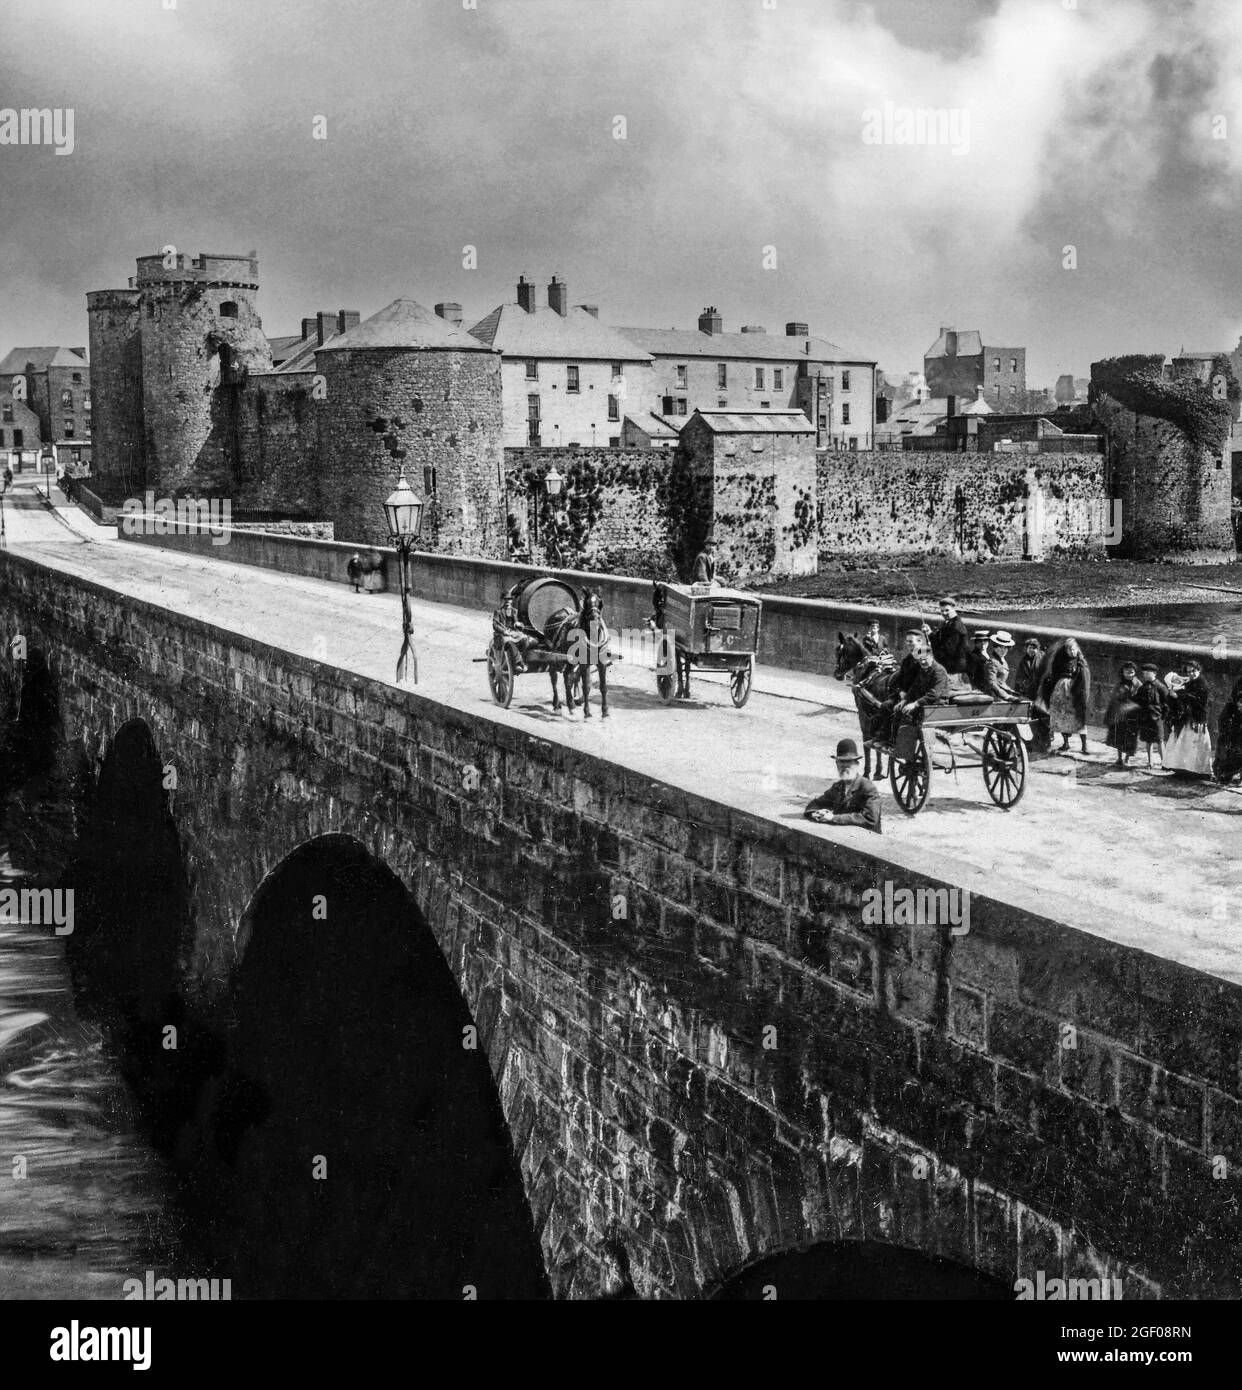 An early 20th century view of horse drawn vehicles and people on the Thormond Bridge over the River Shannon overlooked by the 13th century King John's Castle, City of Limerick, Ireland Stock Photo